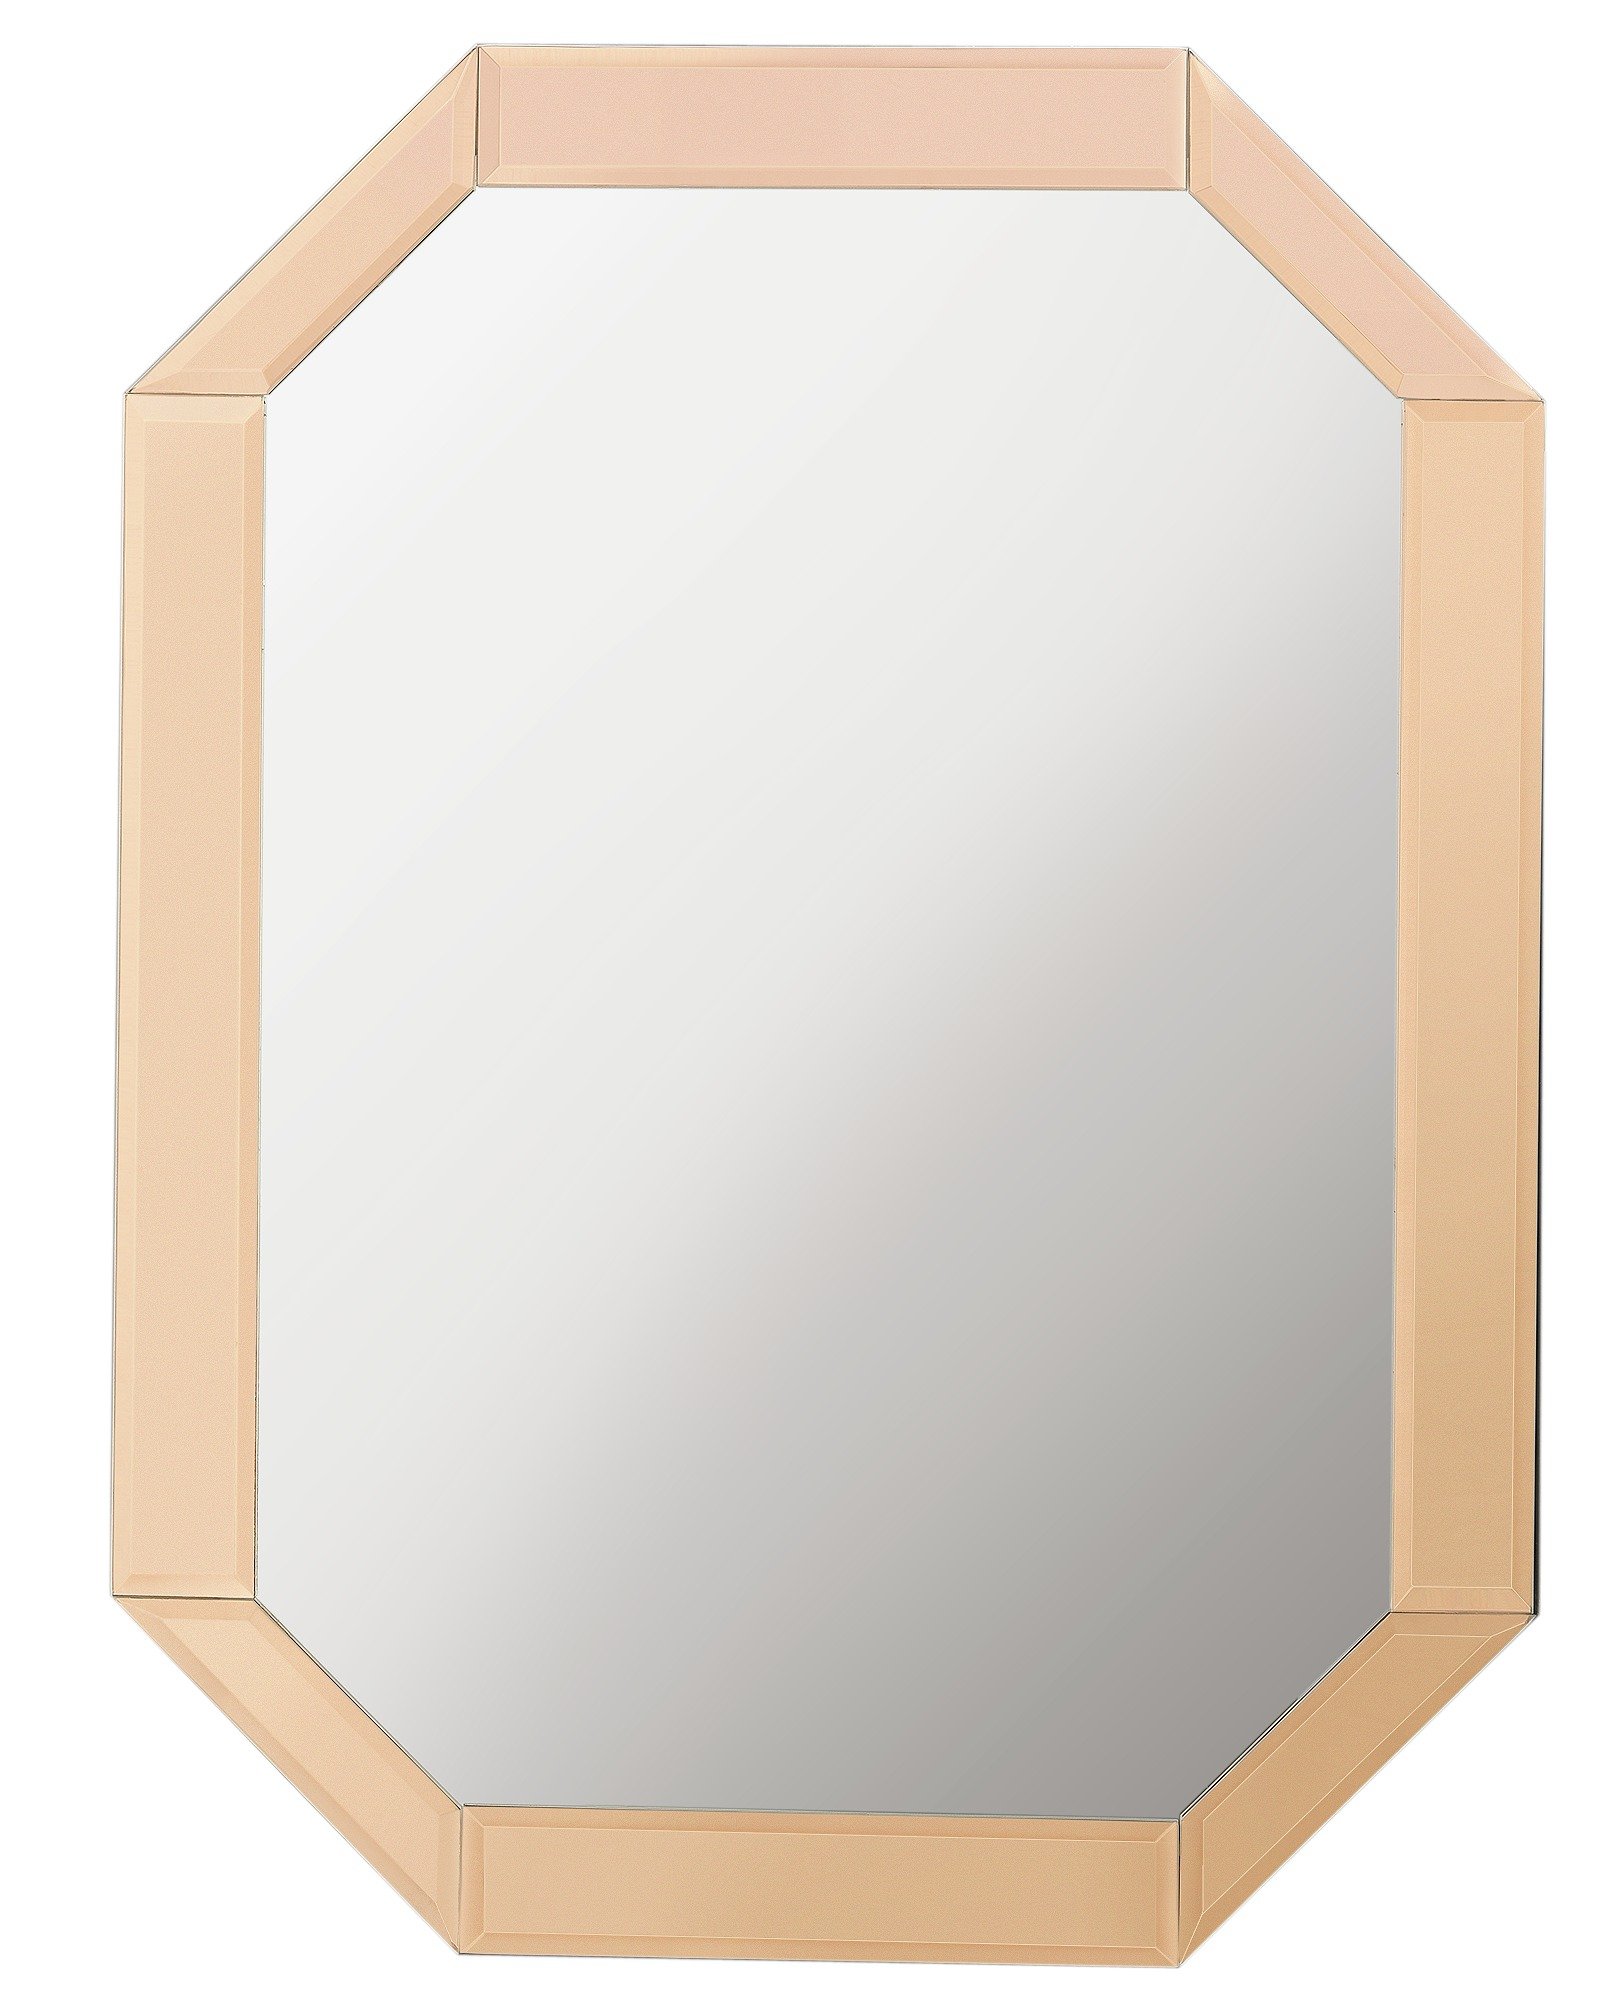 Heart of House Stonehaven Octagonal Bevelled Mirror - Copper